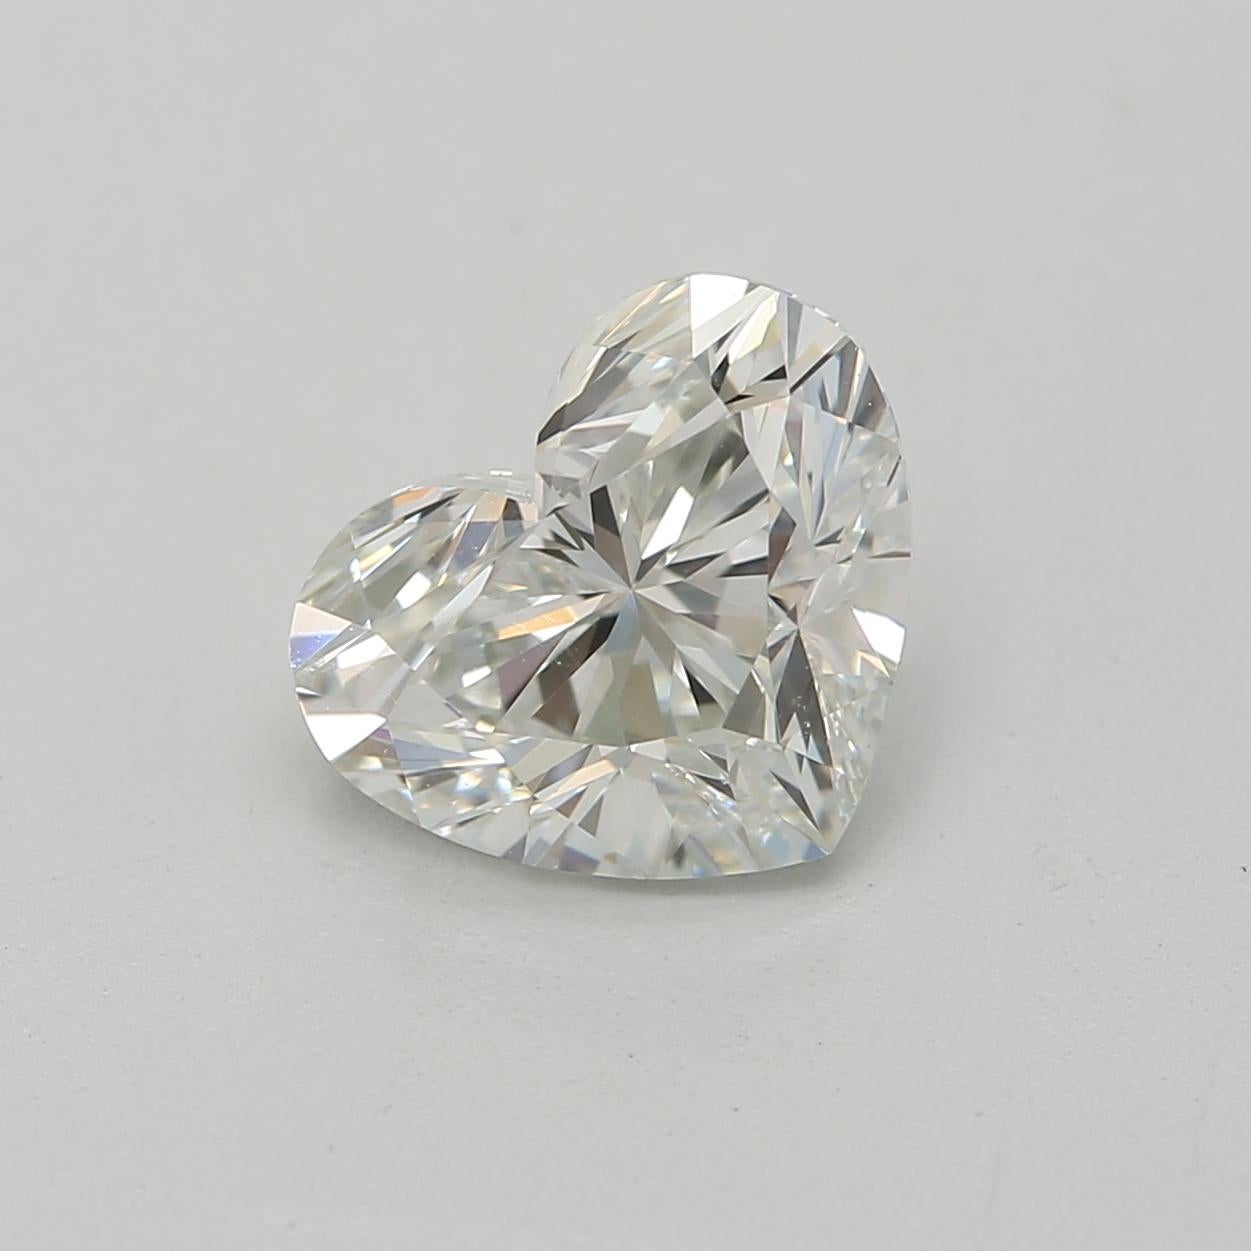 1.00 Carat Very Light Green Heart shaped diamond VS1 Clarity GIA Certified For Sale 1